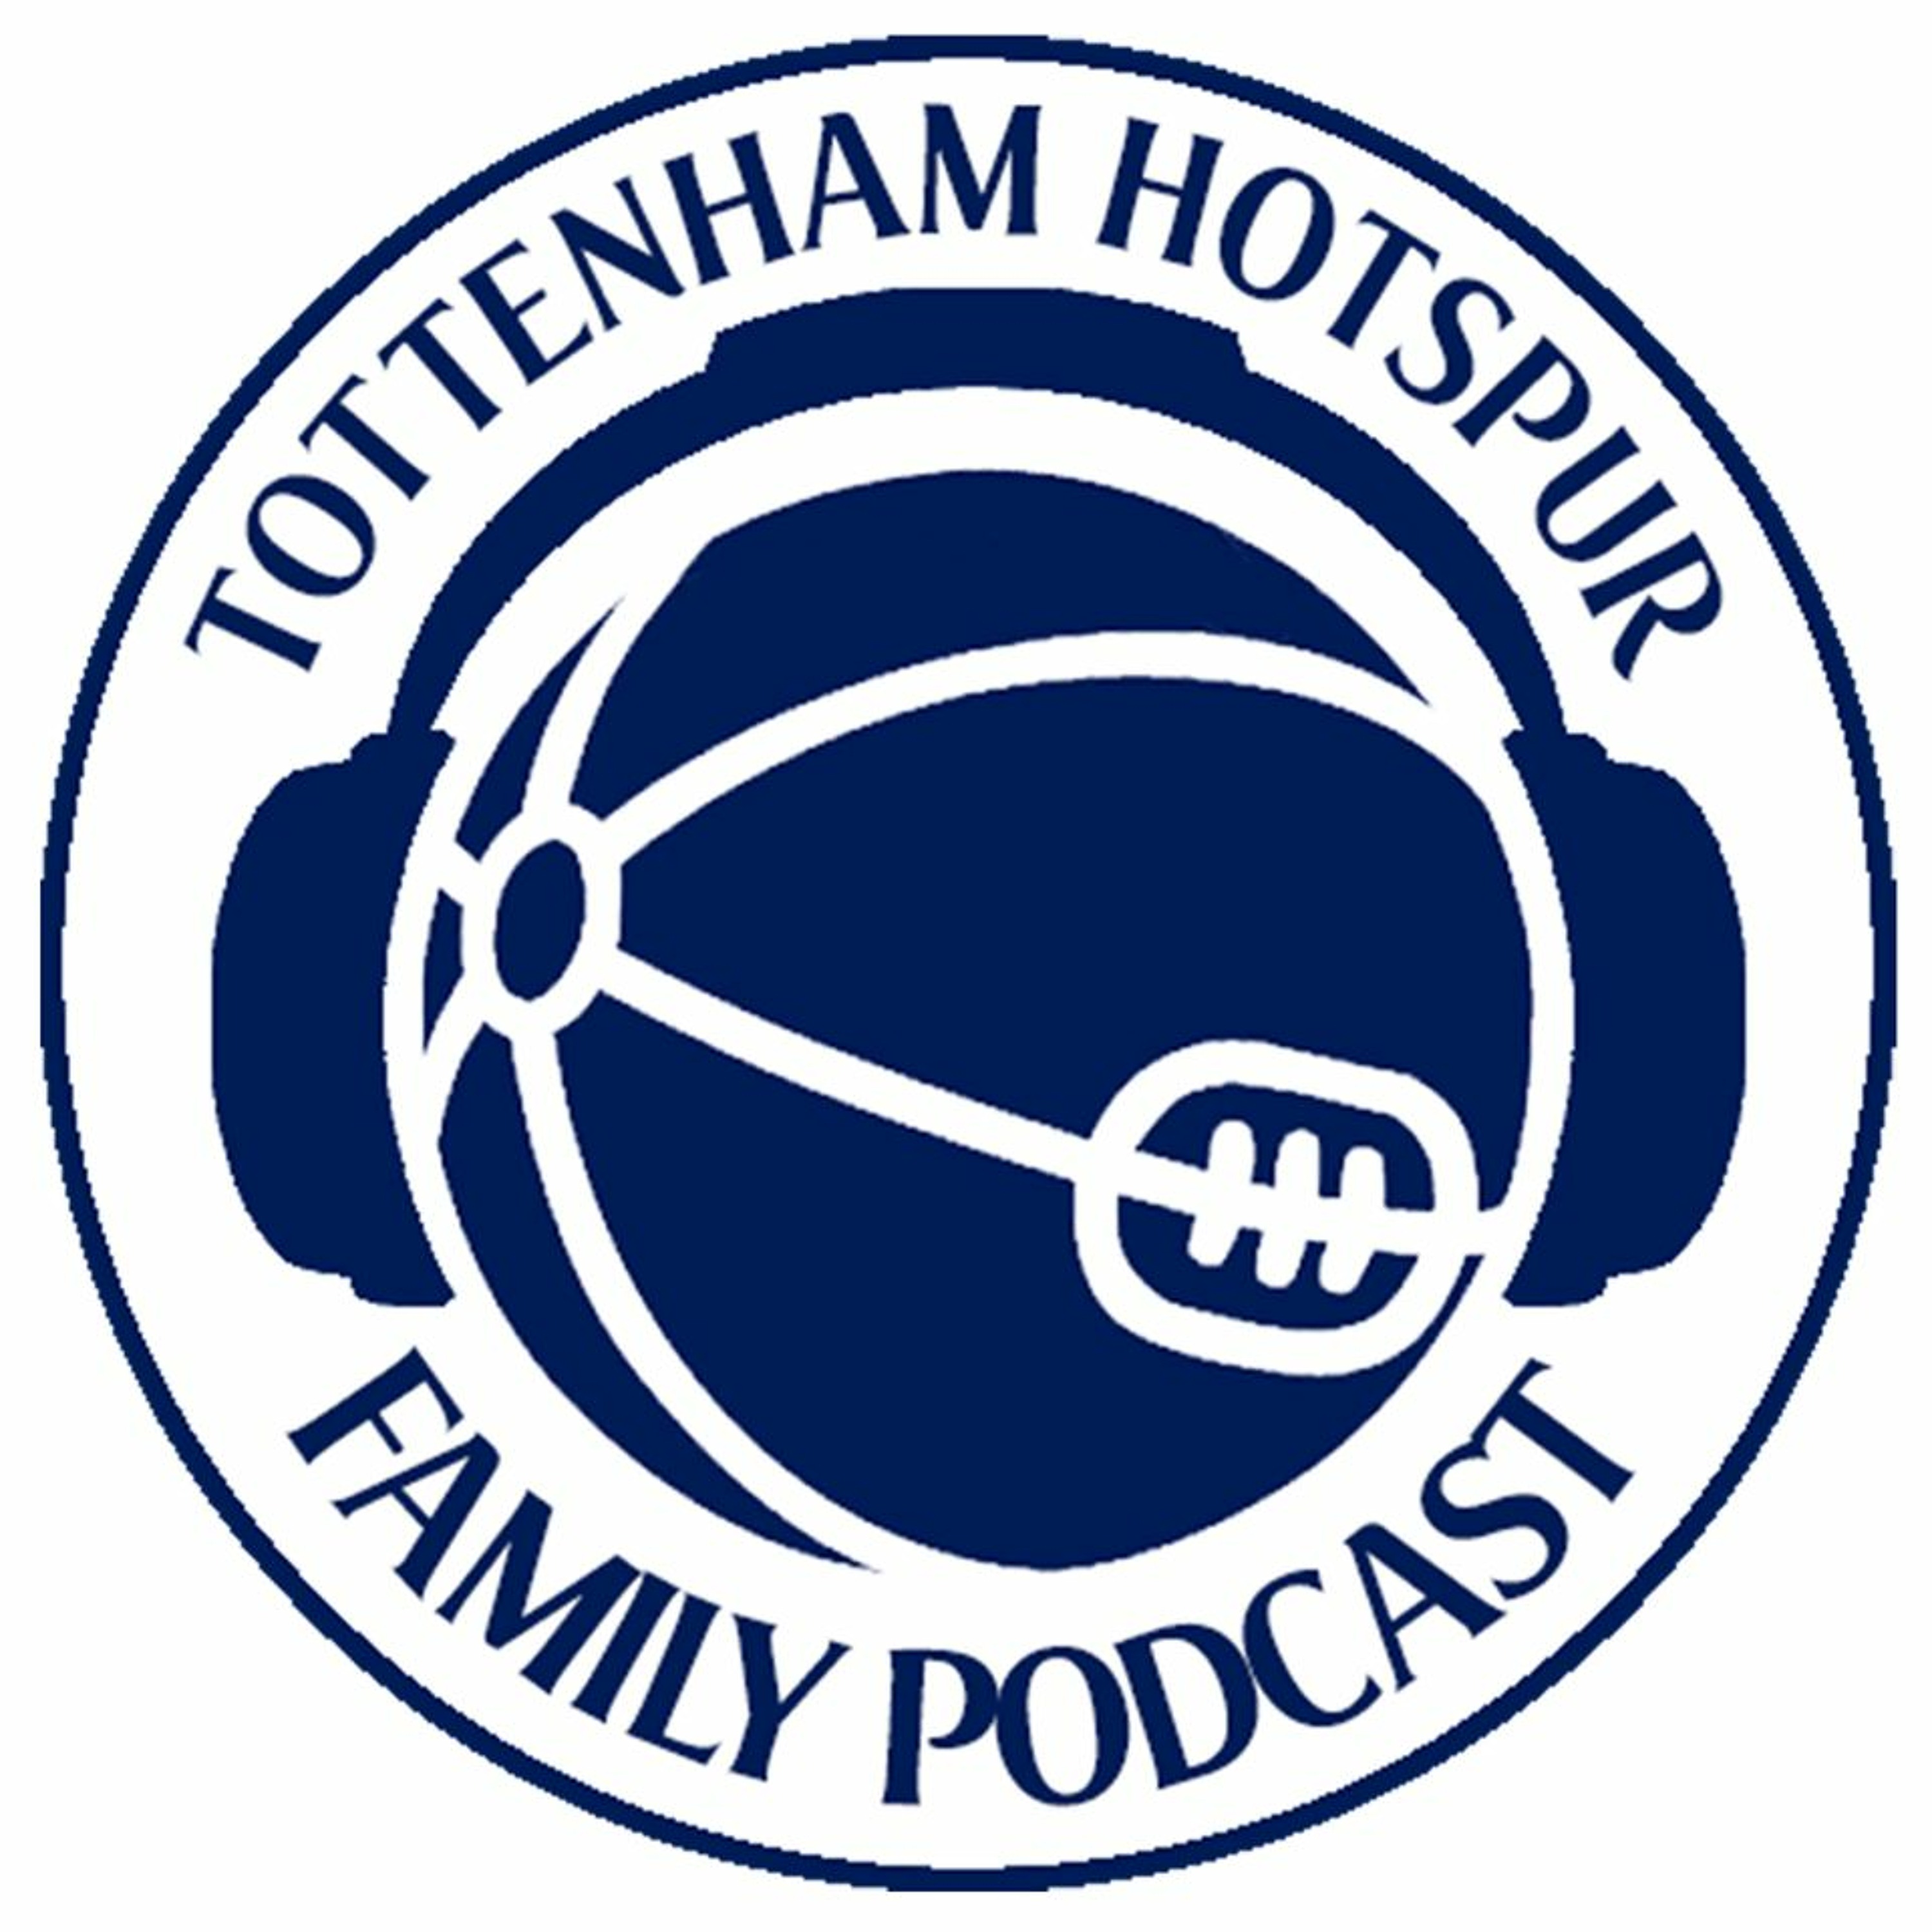 The Tottenham Hotspur Family Podcast - S4EP32 Moss in your eyes